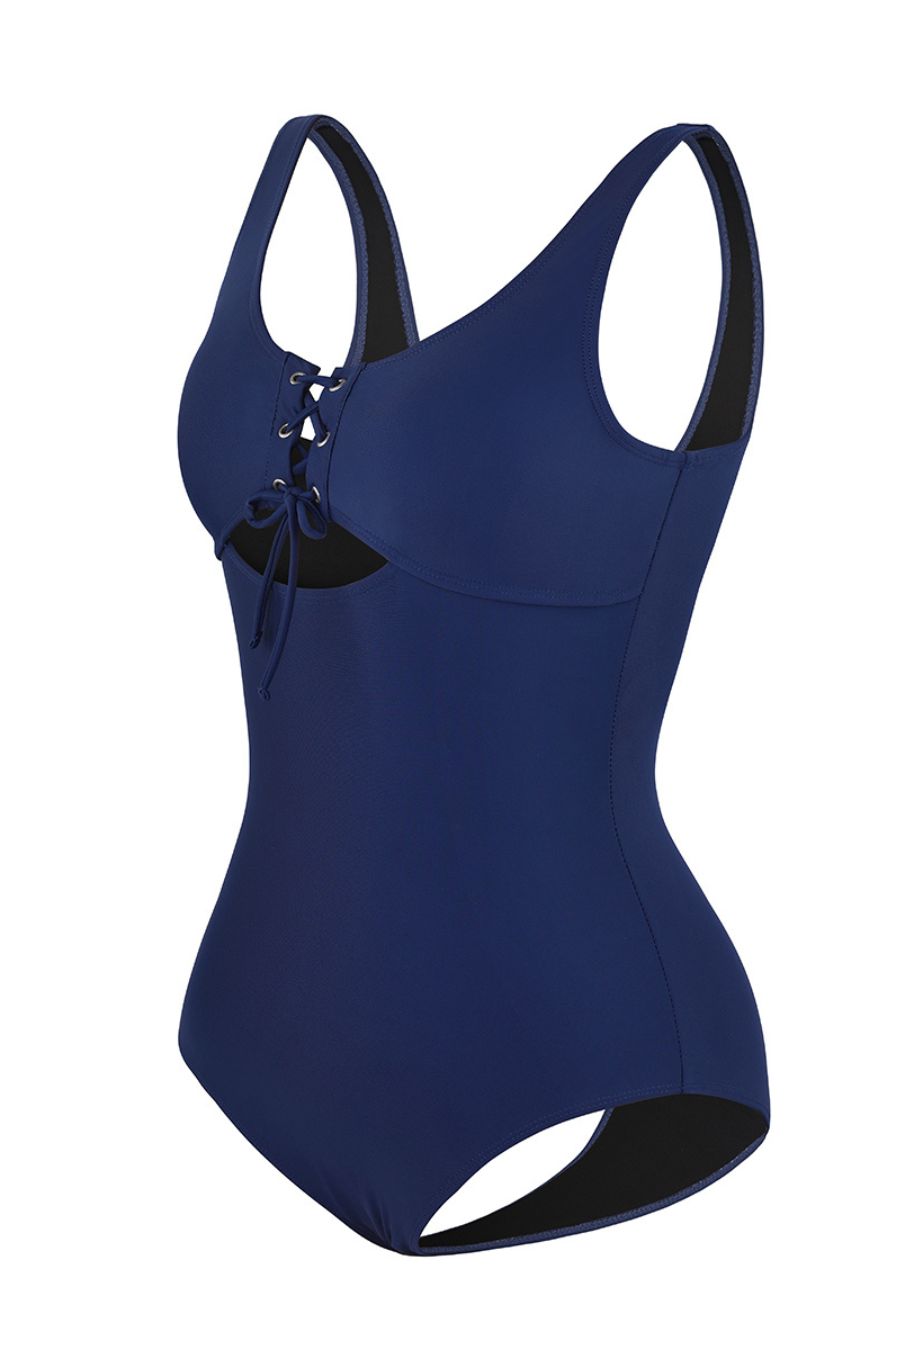 Diosa Shaping Swimsuit - Midnight Sky